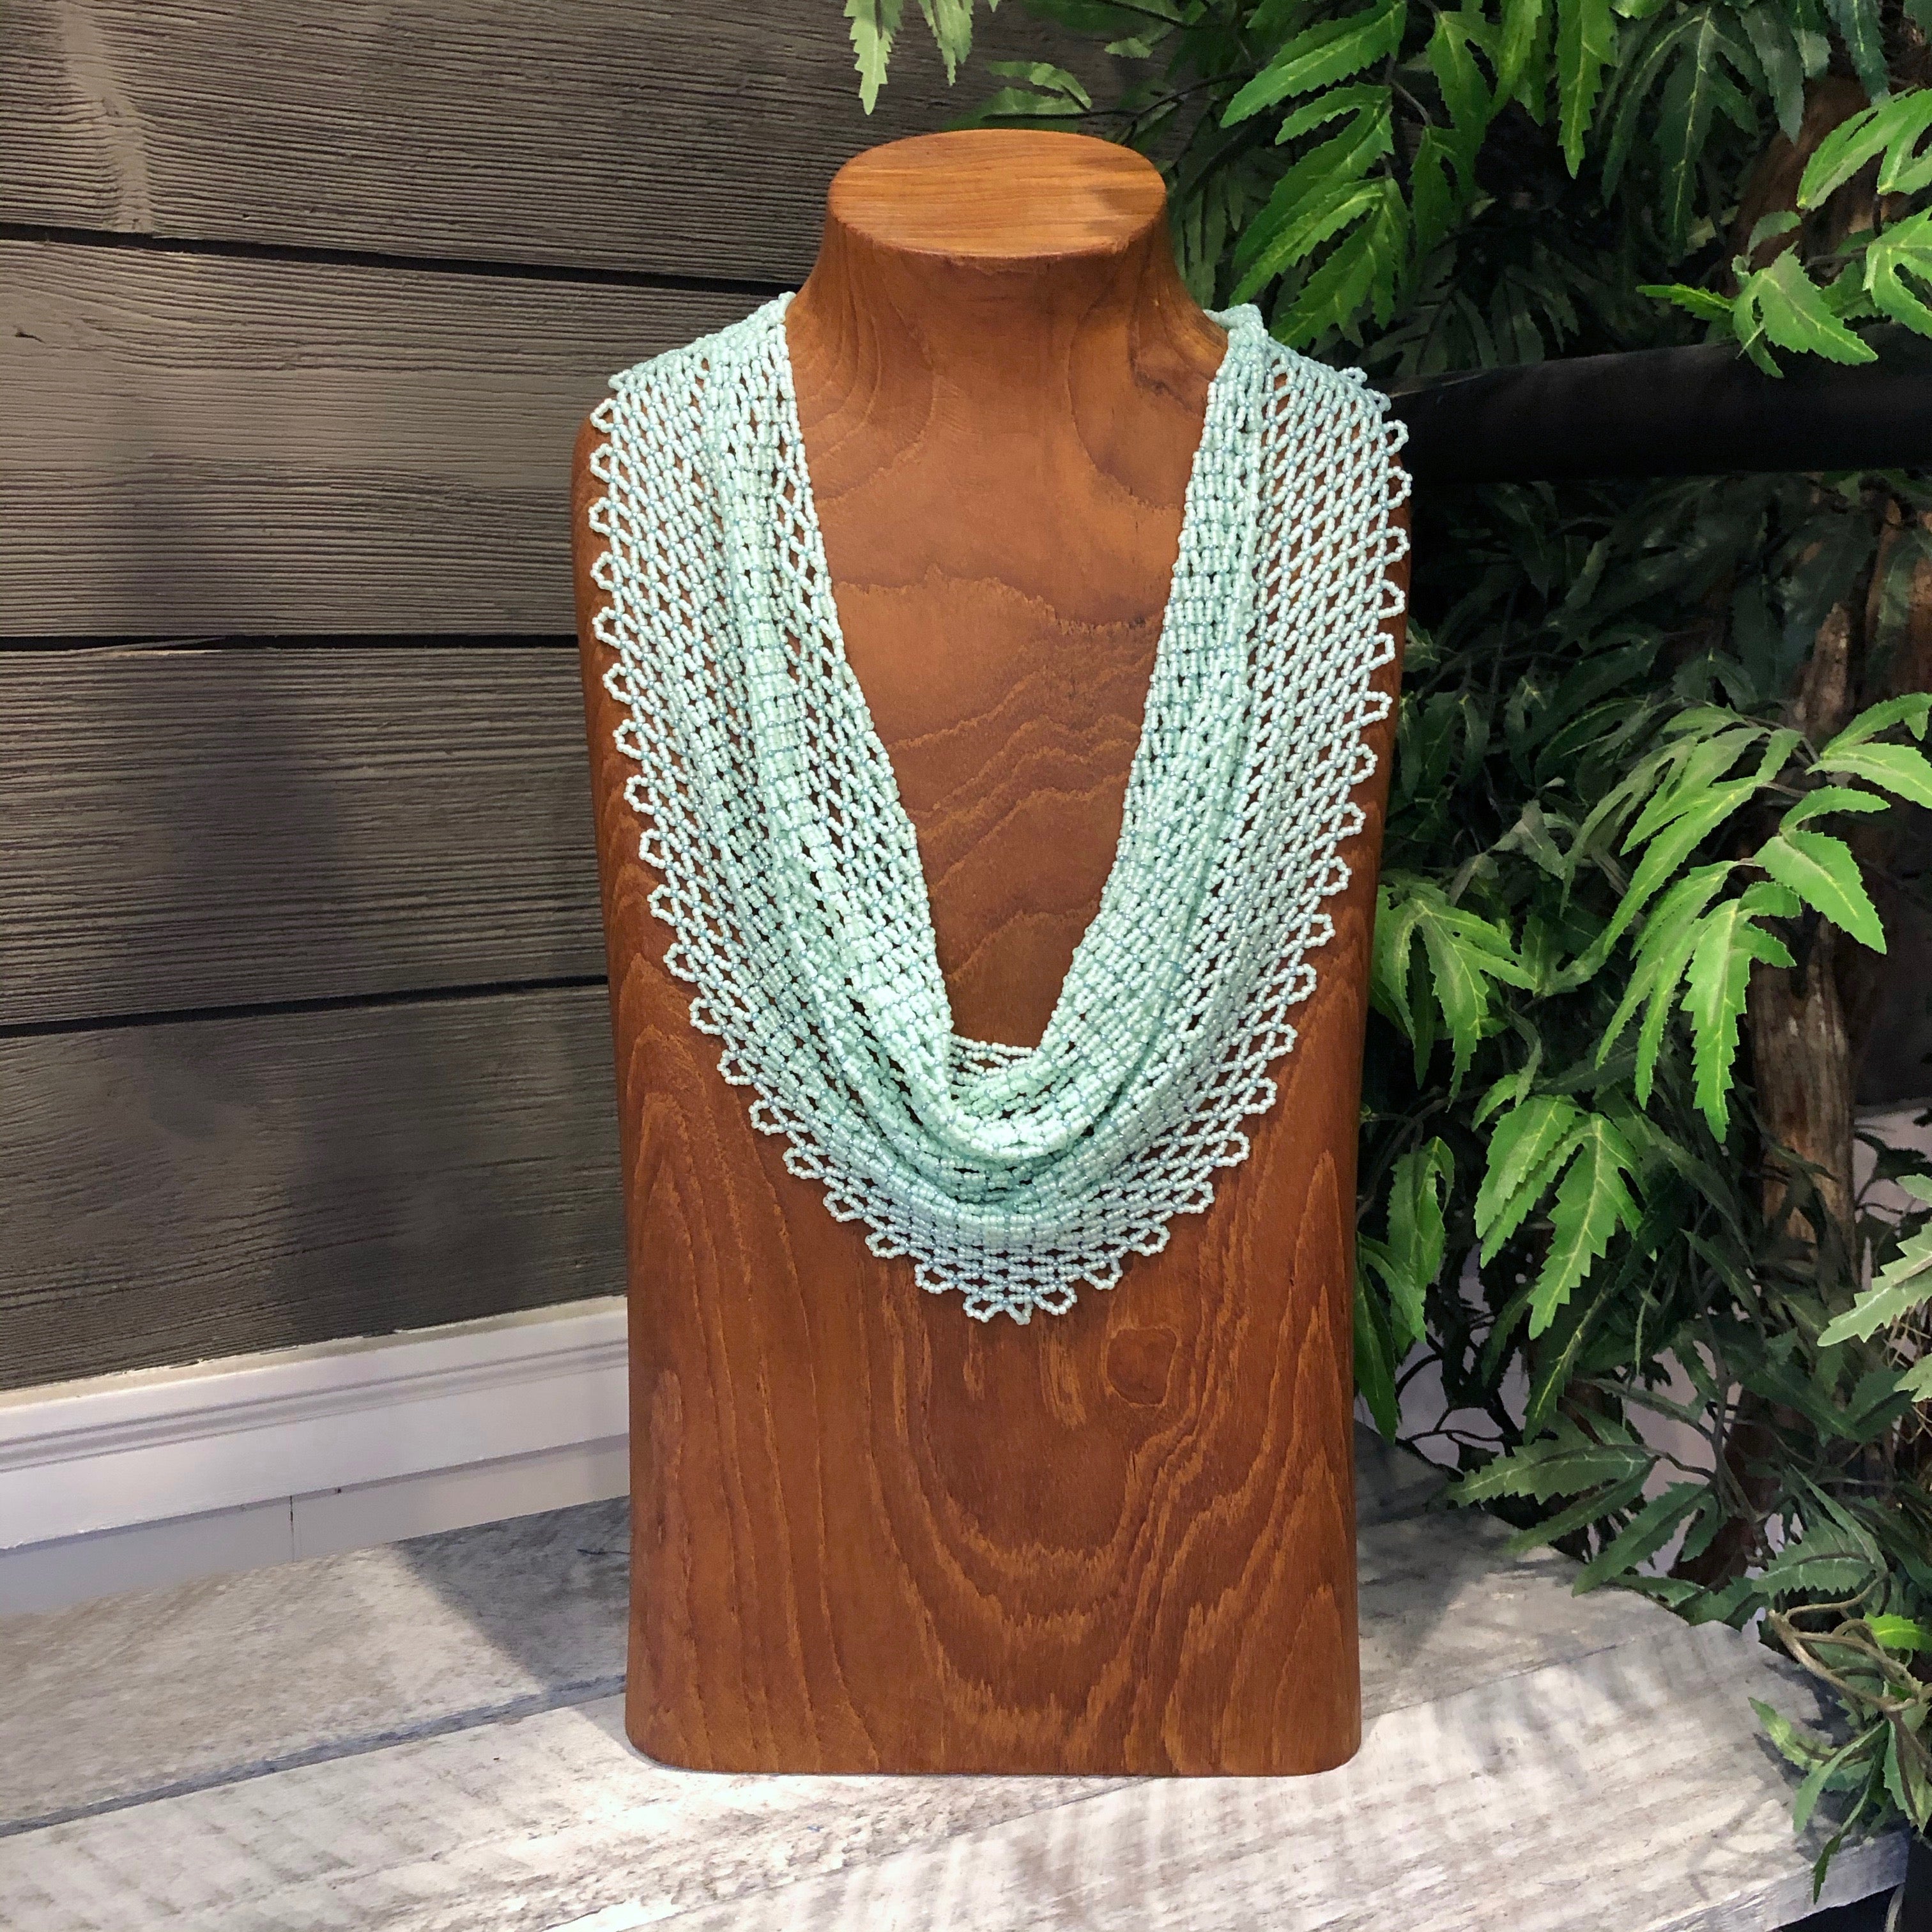 How to Crochet a necklace with beads Class - Island Cove Beads